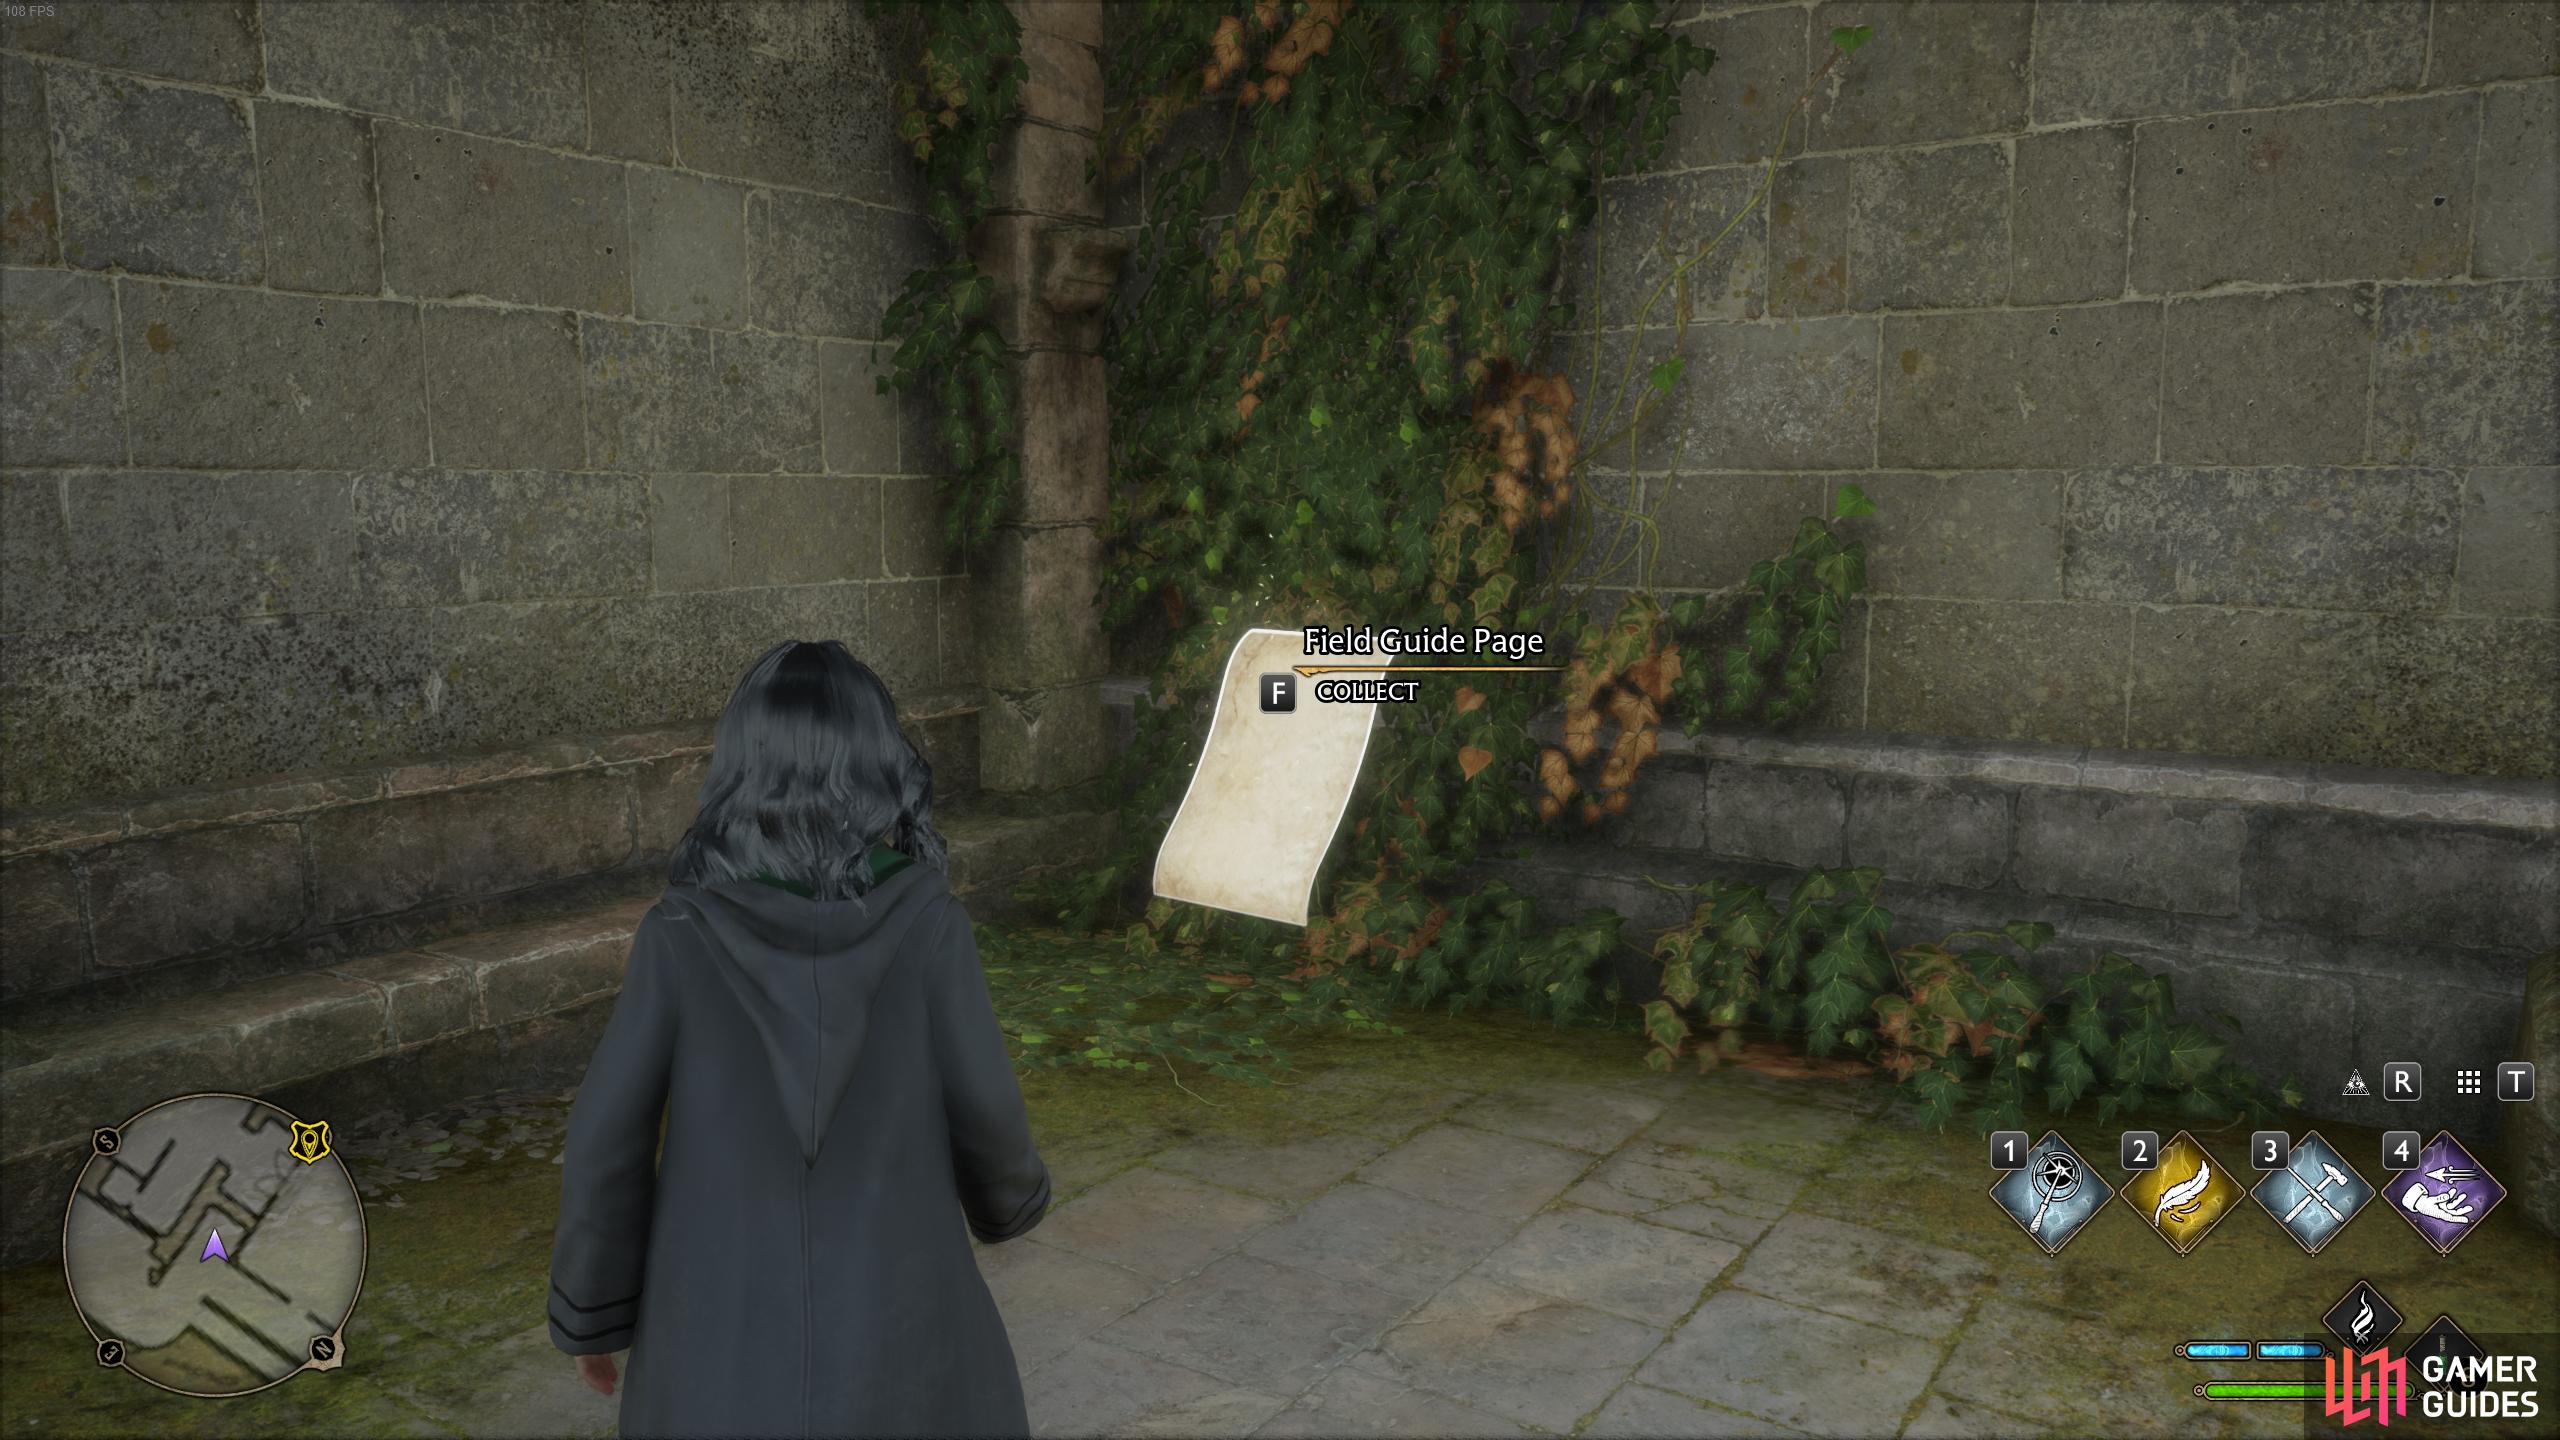 Use Levioso to extract the page from the statue.